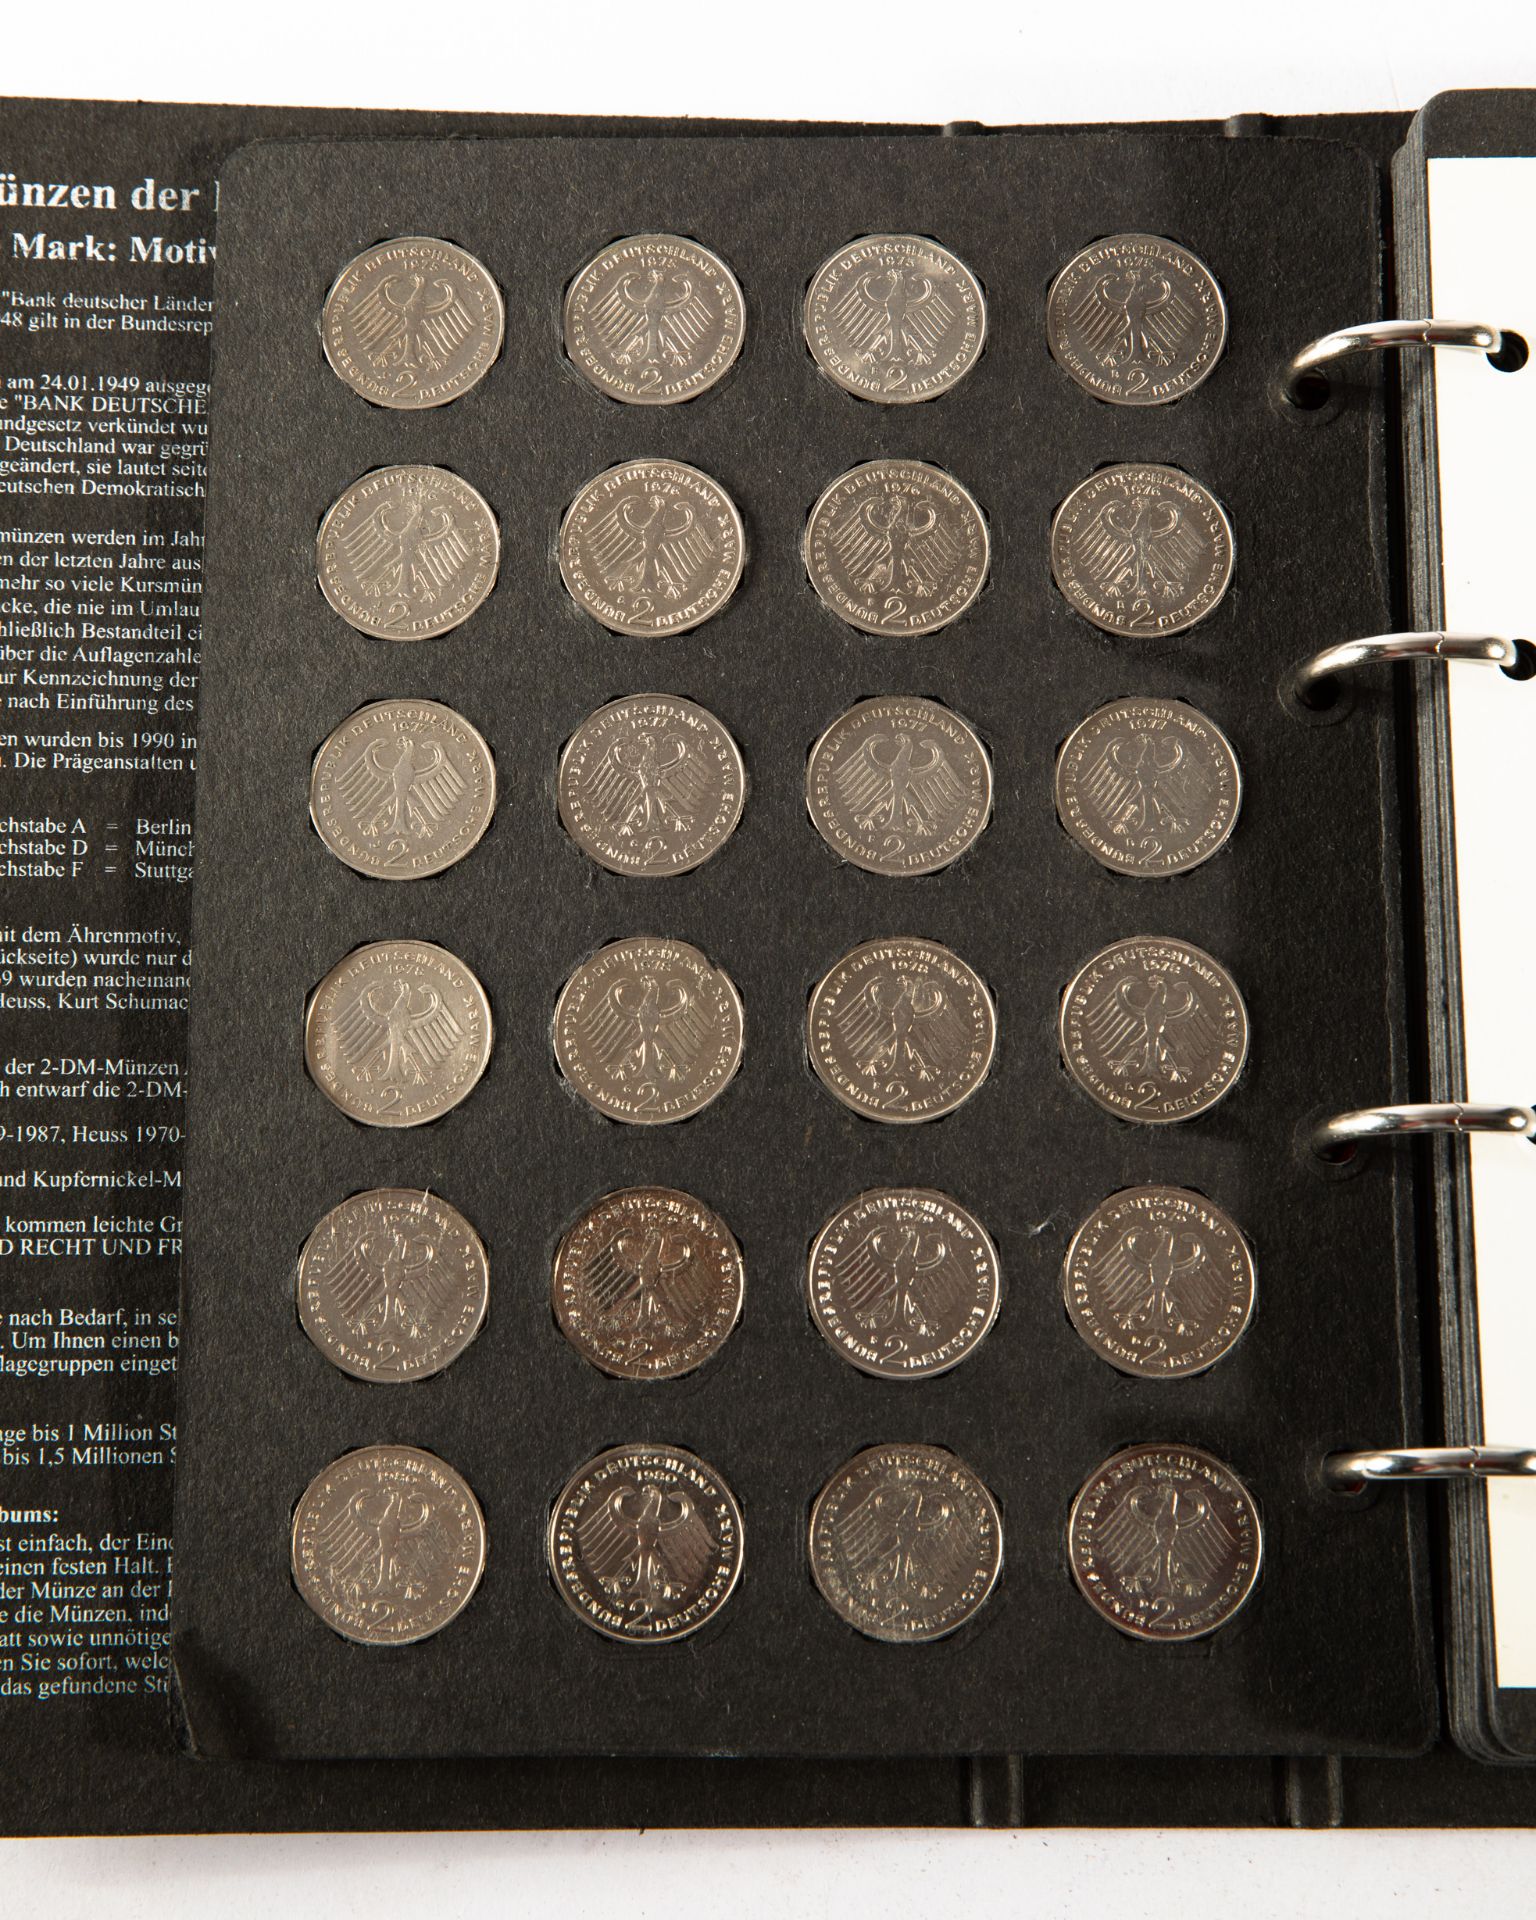 Germany - 2x full coin albums 2 DM Coins 1970-1996 - Image 6 of 33